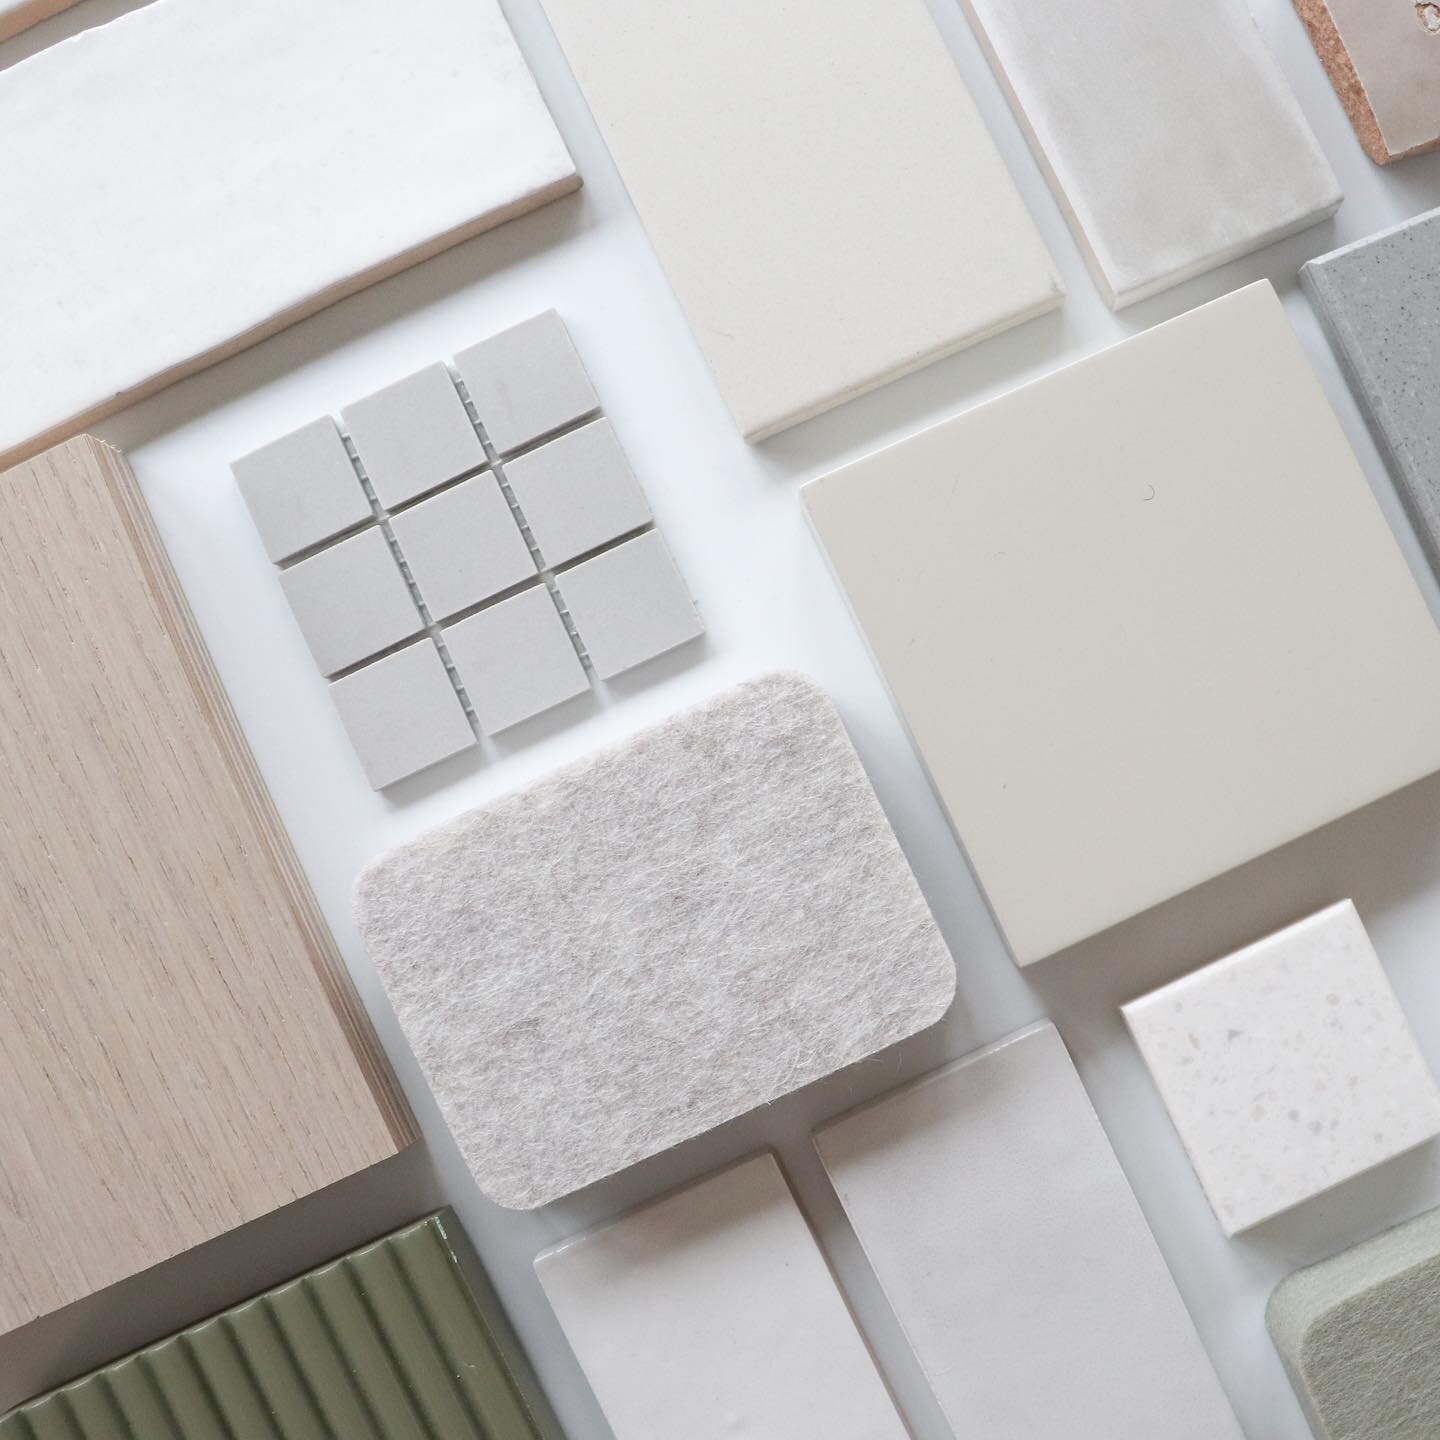 Maho Interiors LOVES working with a natural material palette to create a sense of calm throughout your home&hellip;.

Are you thinking about embarking on a renovation project but don&rsquo;t know where to start?

DM me or visit my website to book a c